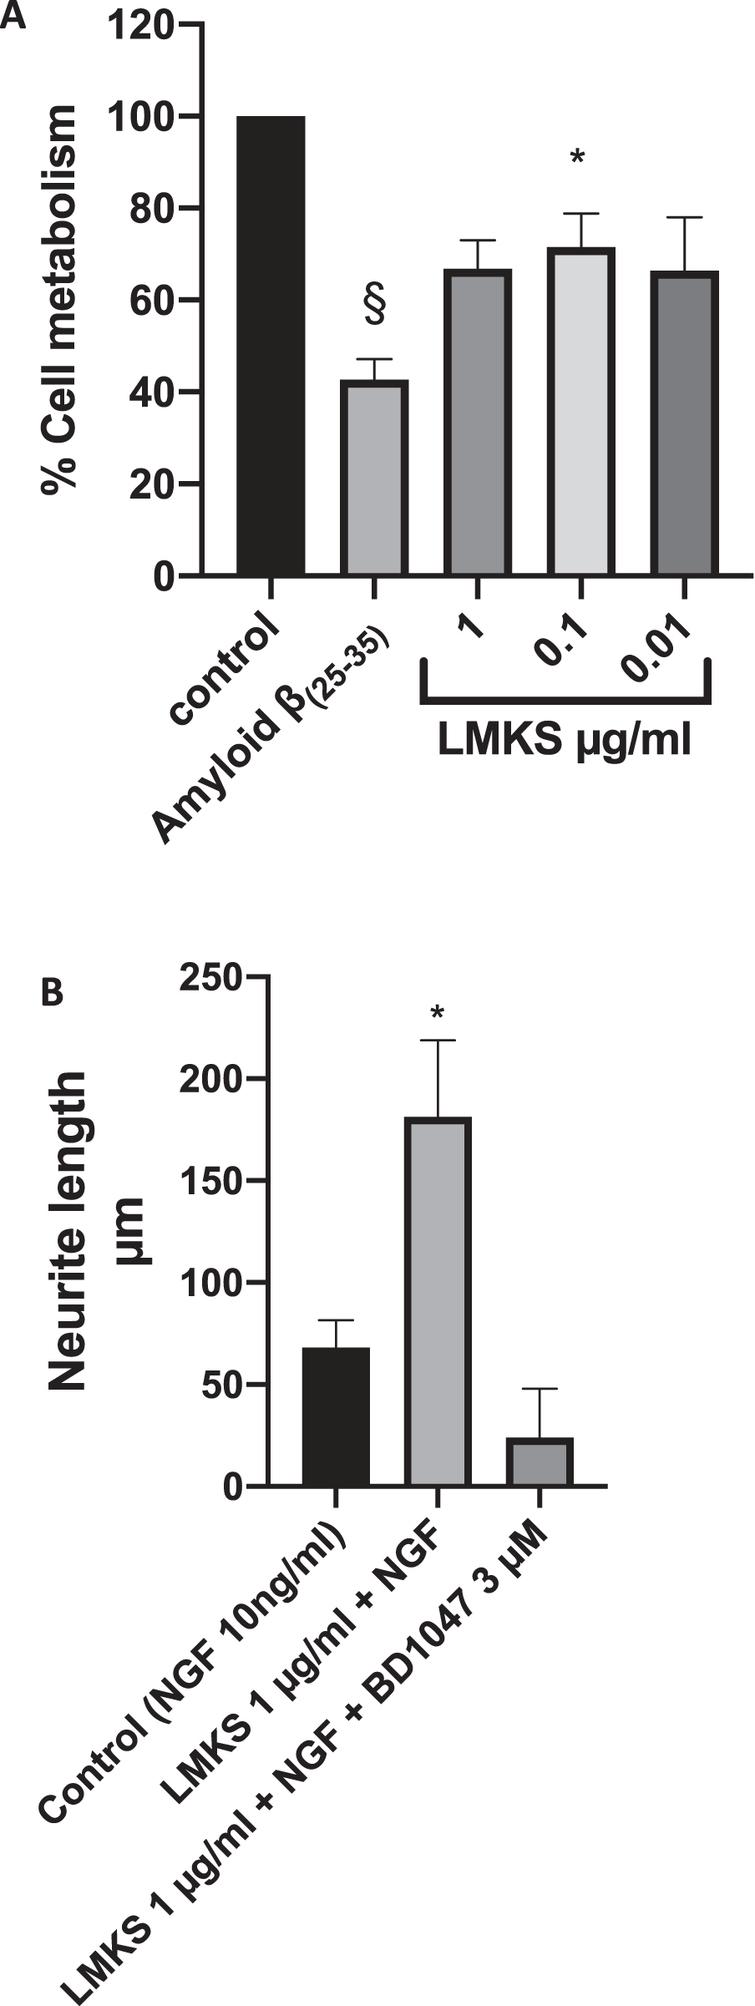 A) MTT Assay of differentiated PC12 cells treated with LMKS and/or 10 μM Aβ(25–35). §Significant difference in MTT metabolism between control and Aβ(25–35) treated PC 12 cells (ANOVA followed by Dunnett’s post hoc multiple comparison test p < 0.0001). *Significant difference in MTT metabolism between Aβ(25–35) treated PC12 cells and LMKS 0.1 μg/ml Aβ(25–35) treated PC12 cells (ANOVA followed by Dunnett’s post hoc multiple comparison test p = 0.04). B) The effect of LMKS on neurite outgrowth in PC12 cells. *Significant increase in neurite growth compared to the control ANOVA followed by Dunnett’s post hoc multiple comparison test p = 0.04).